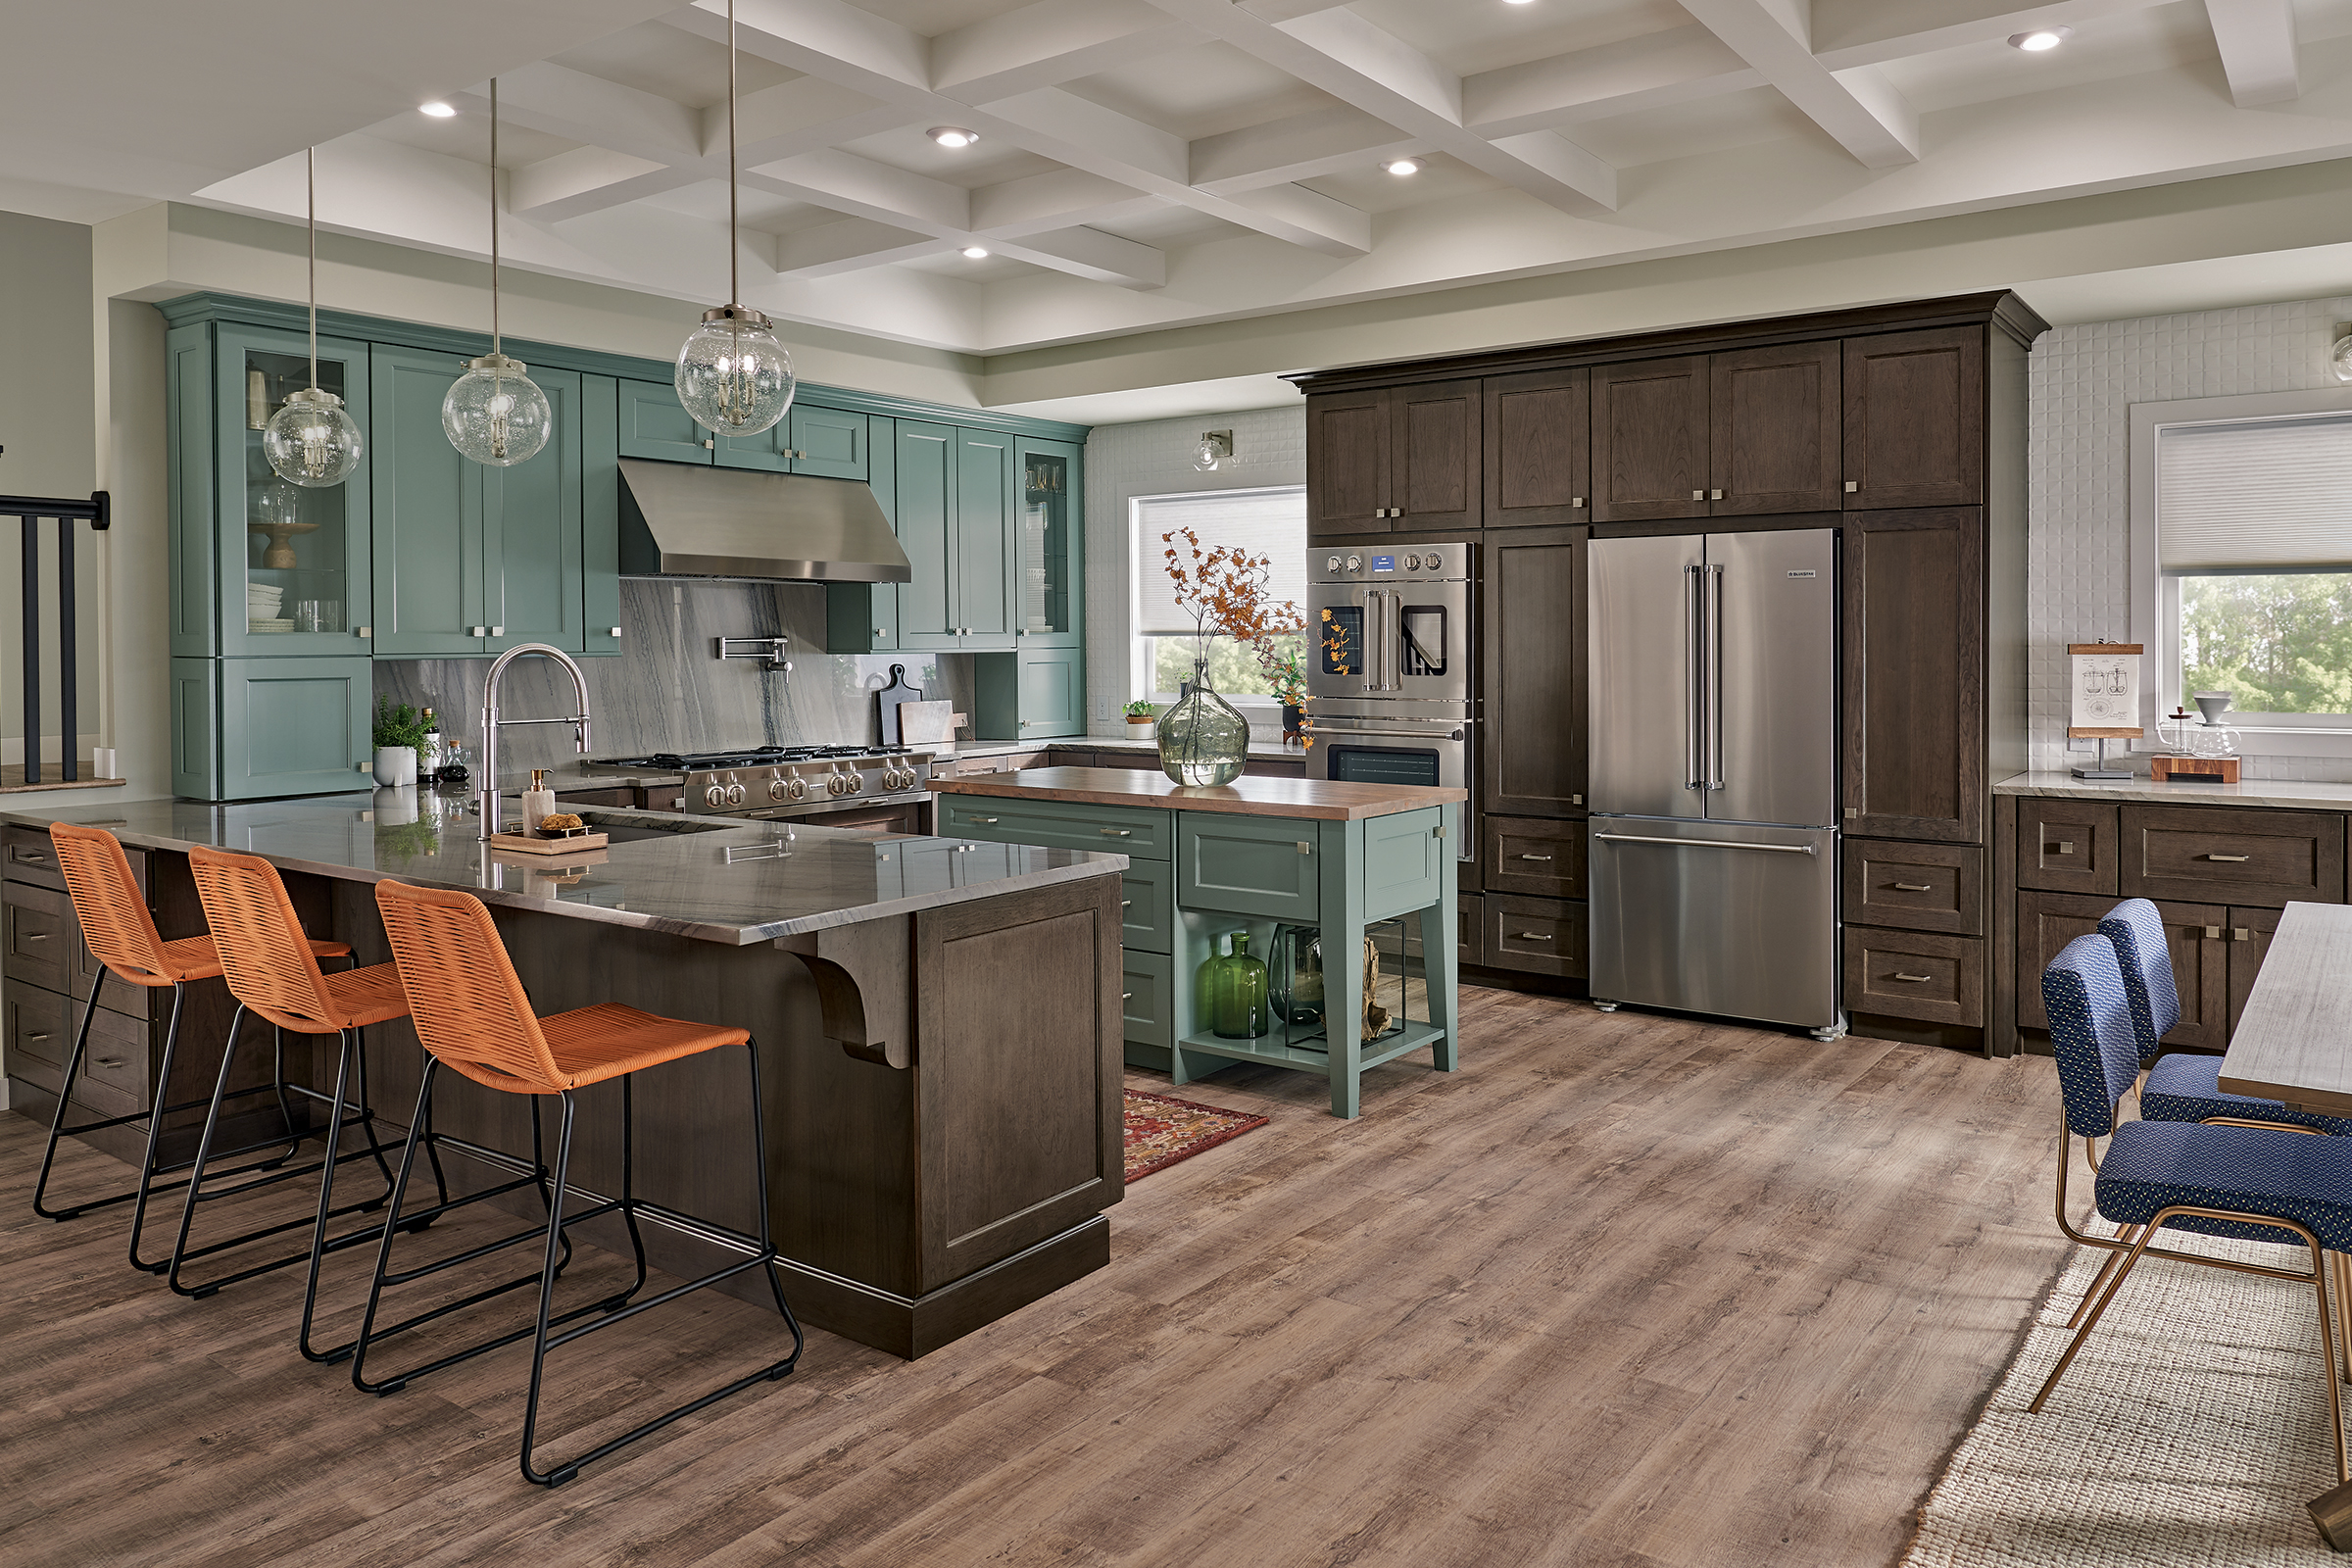 KraftMaid two-color eclectic kitchen cabinets.